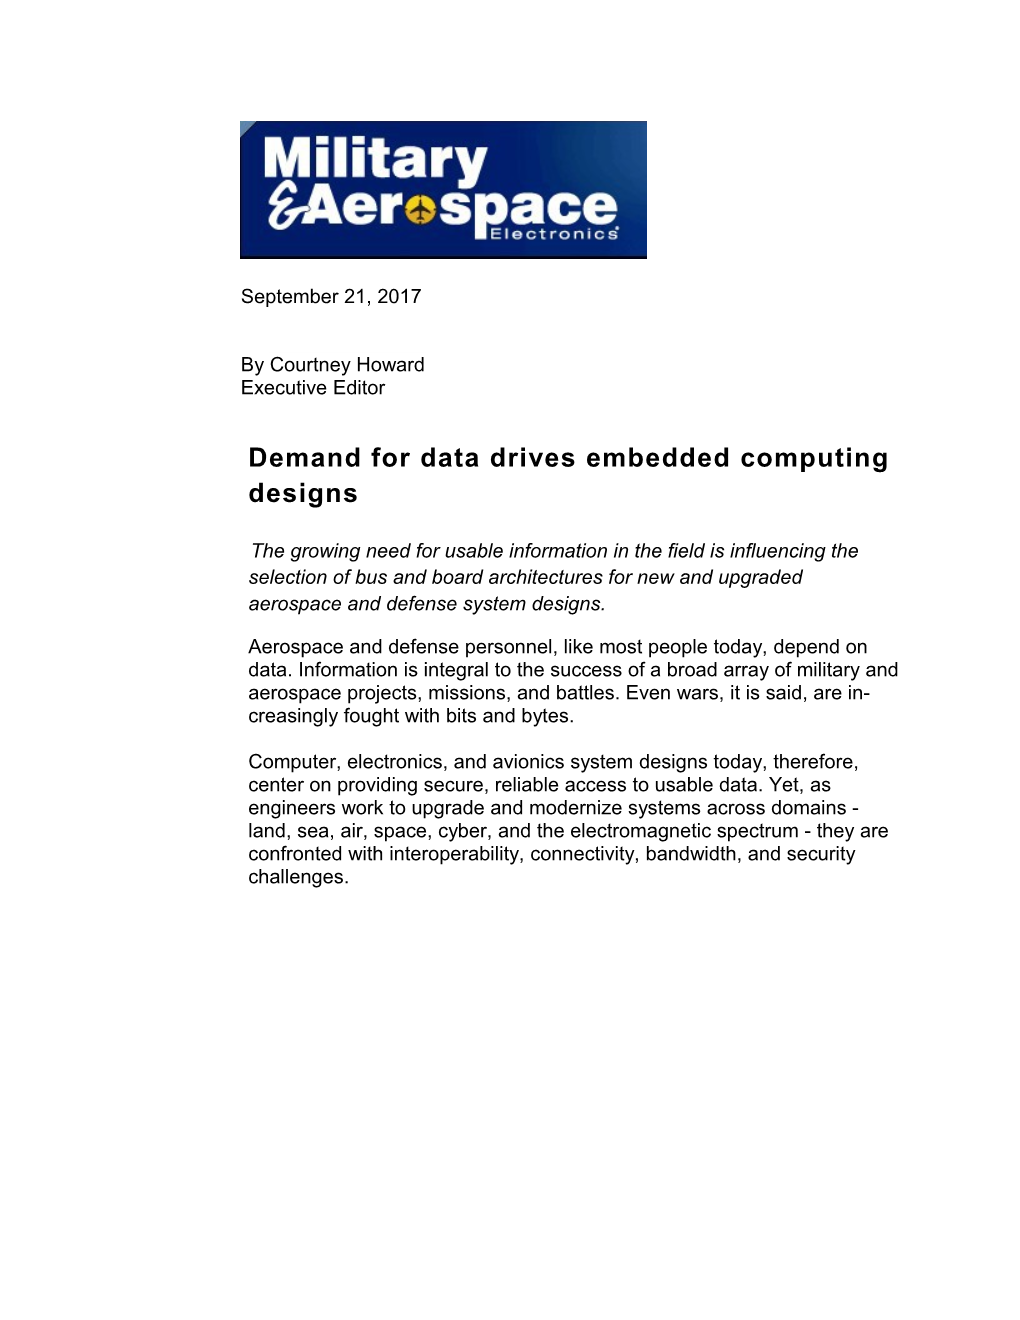 Demand for Data Drives Embedded Computing Designs